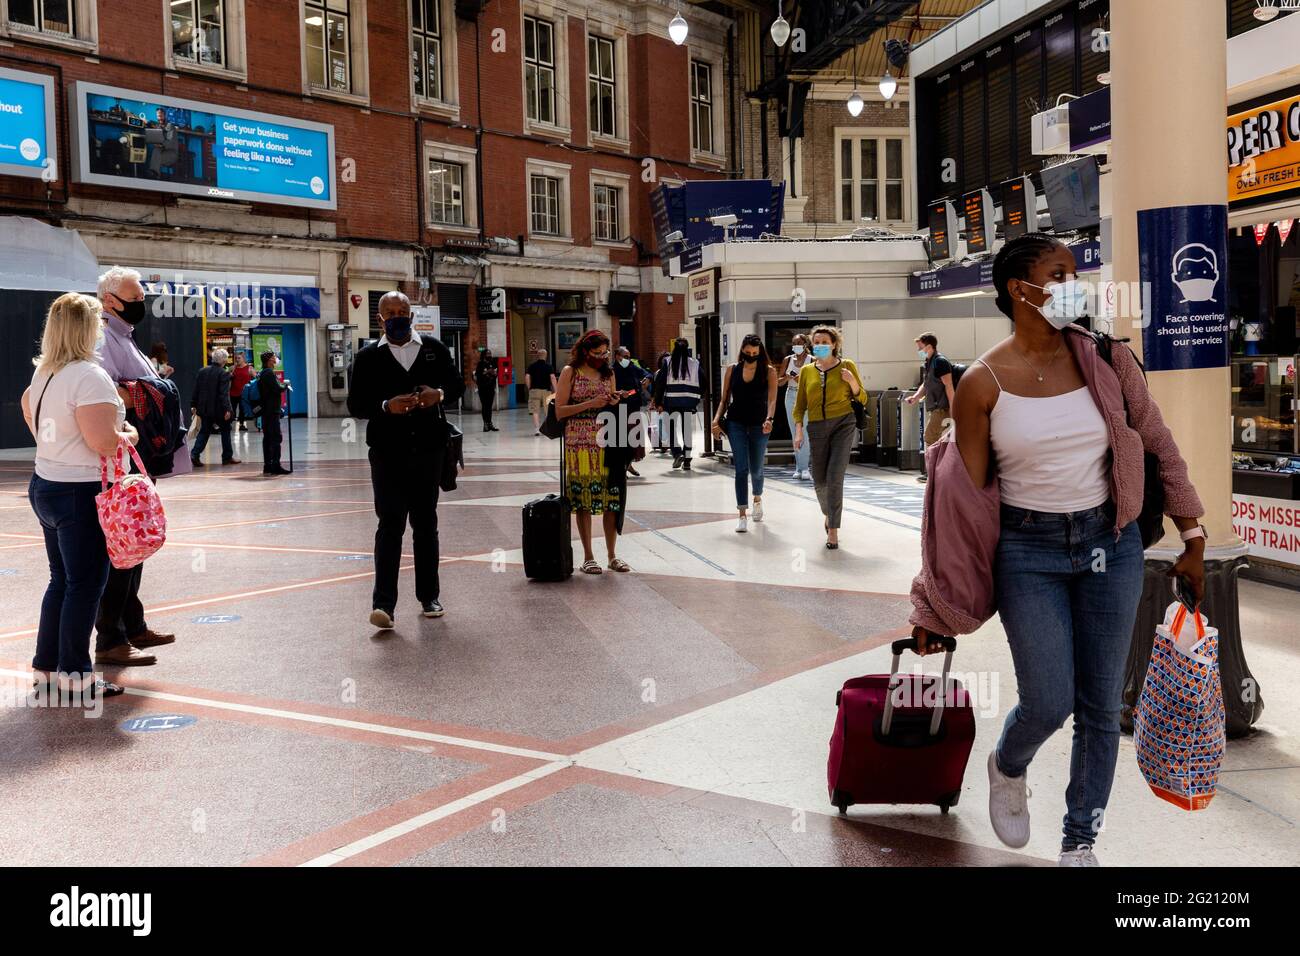 London, United Kingdom, June 7, 2021. Commuters walk through the entrance of London Victoria train station as Coronavirus restrictions ease and the economy start to pick up.  The Prime Minister Boris Johnson has set a road map on easing the restrictions. (Dominika Zarzycka/Alamy) Credit: Dominika Zarzycka/Alamy Live News Stock Photo